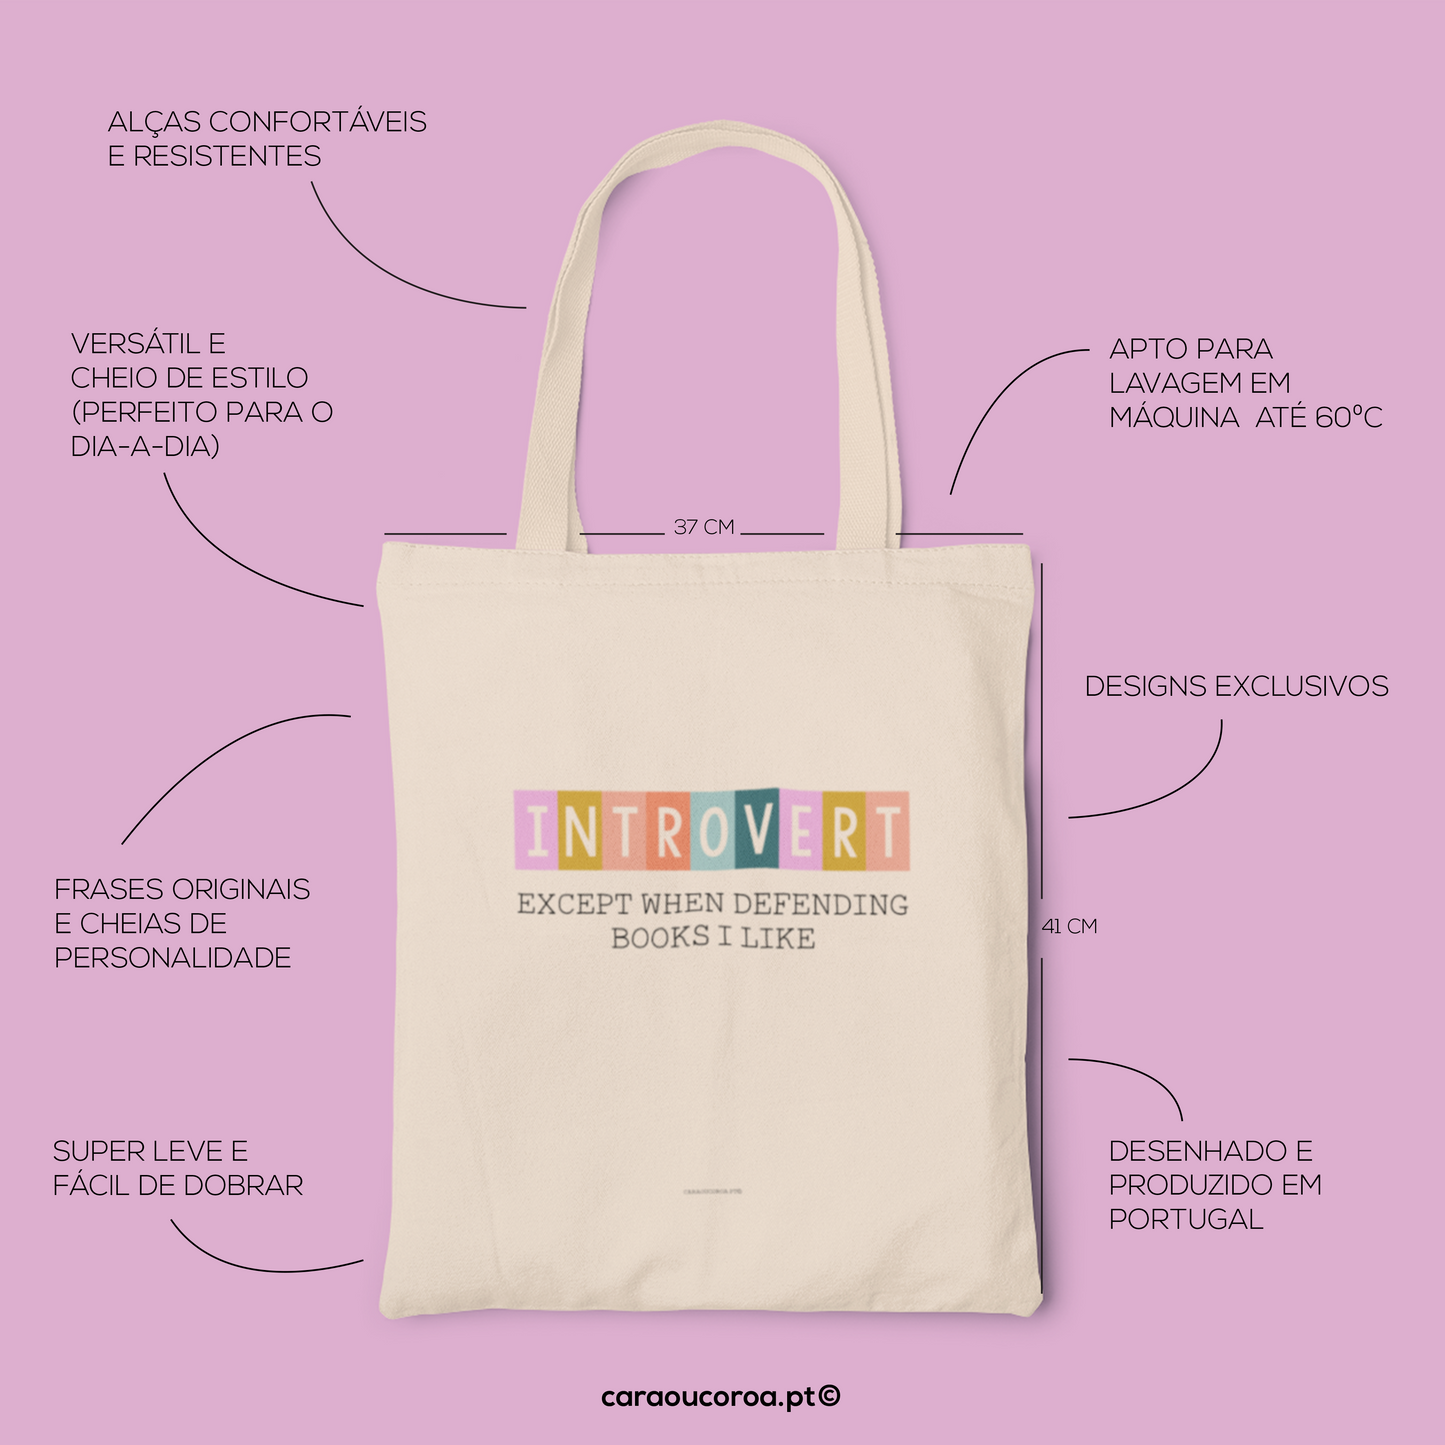 Tote Bag "Introvert"